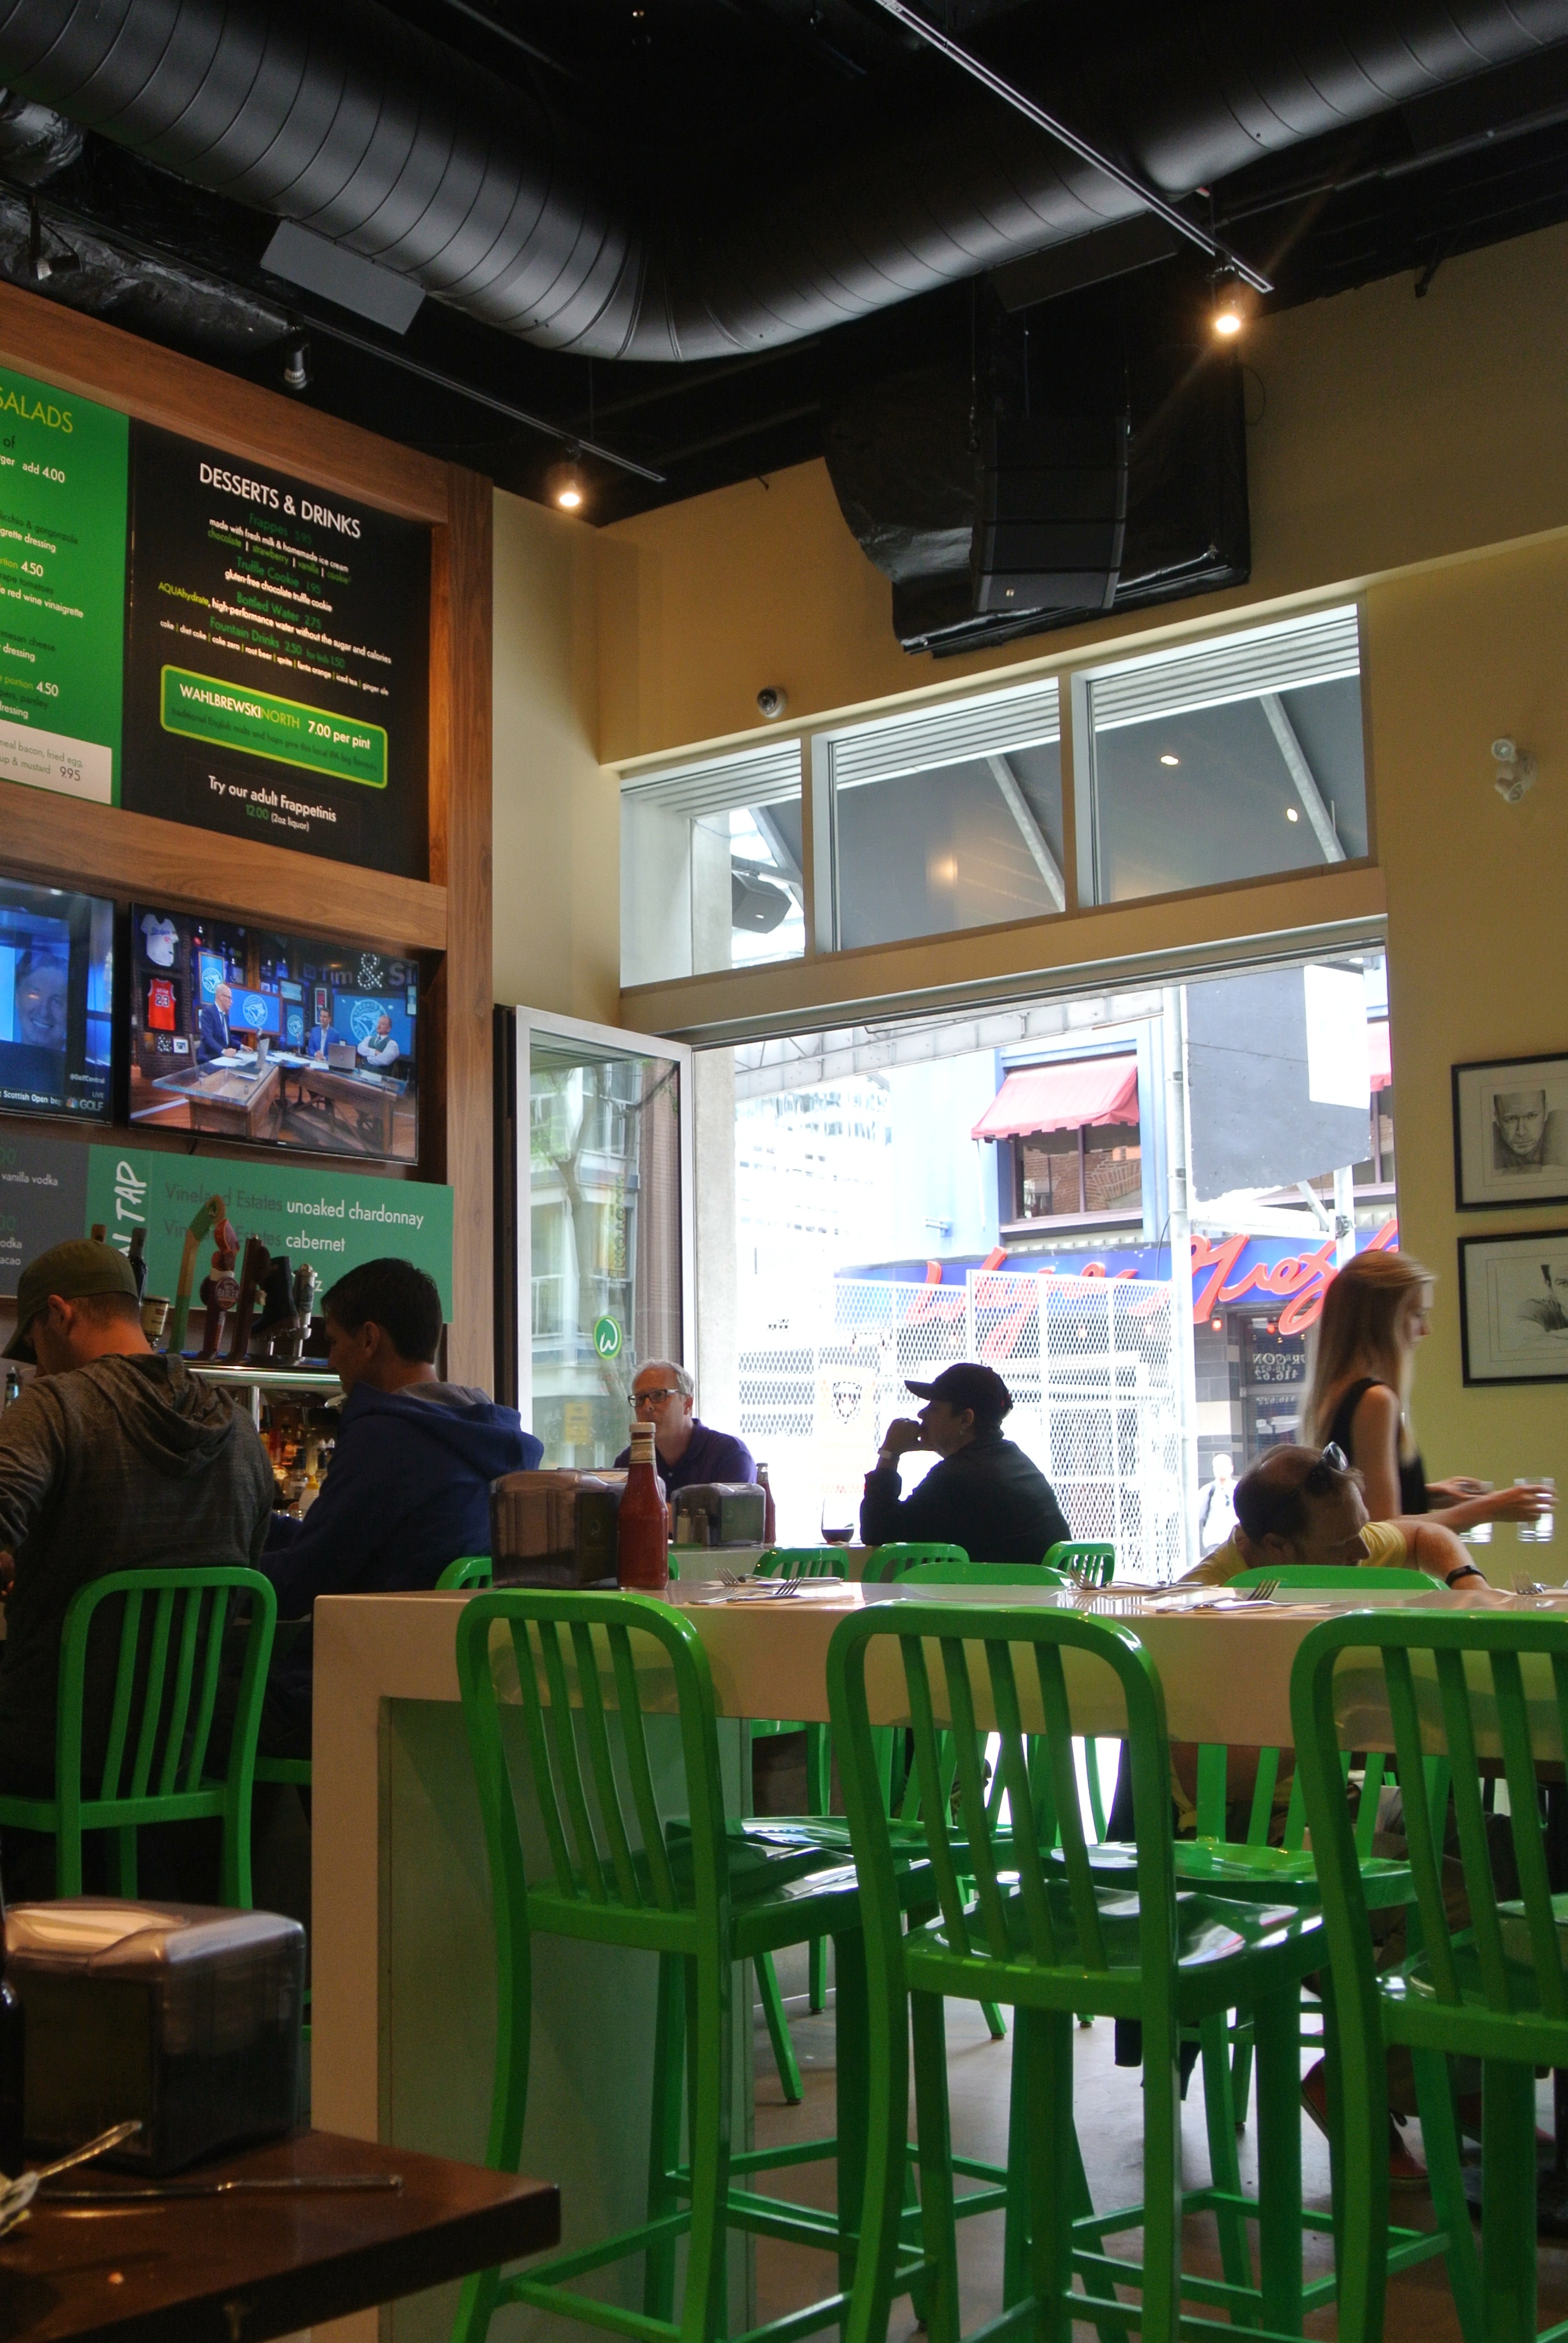 The sports bar look of Wahlburgers.